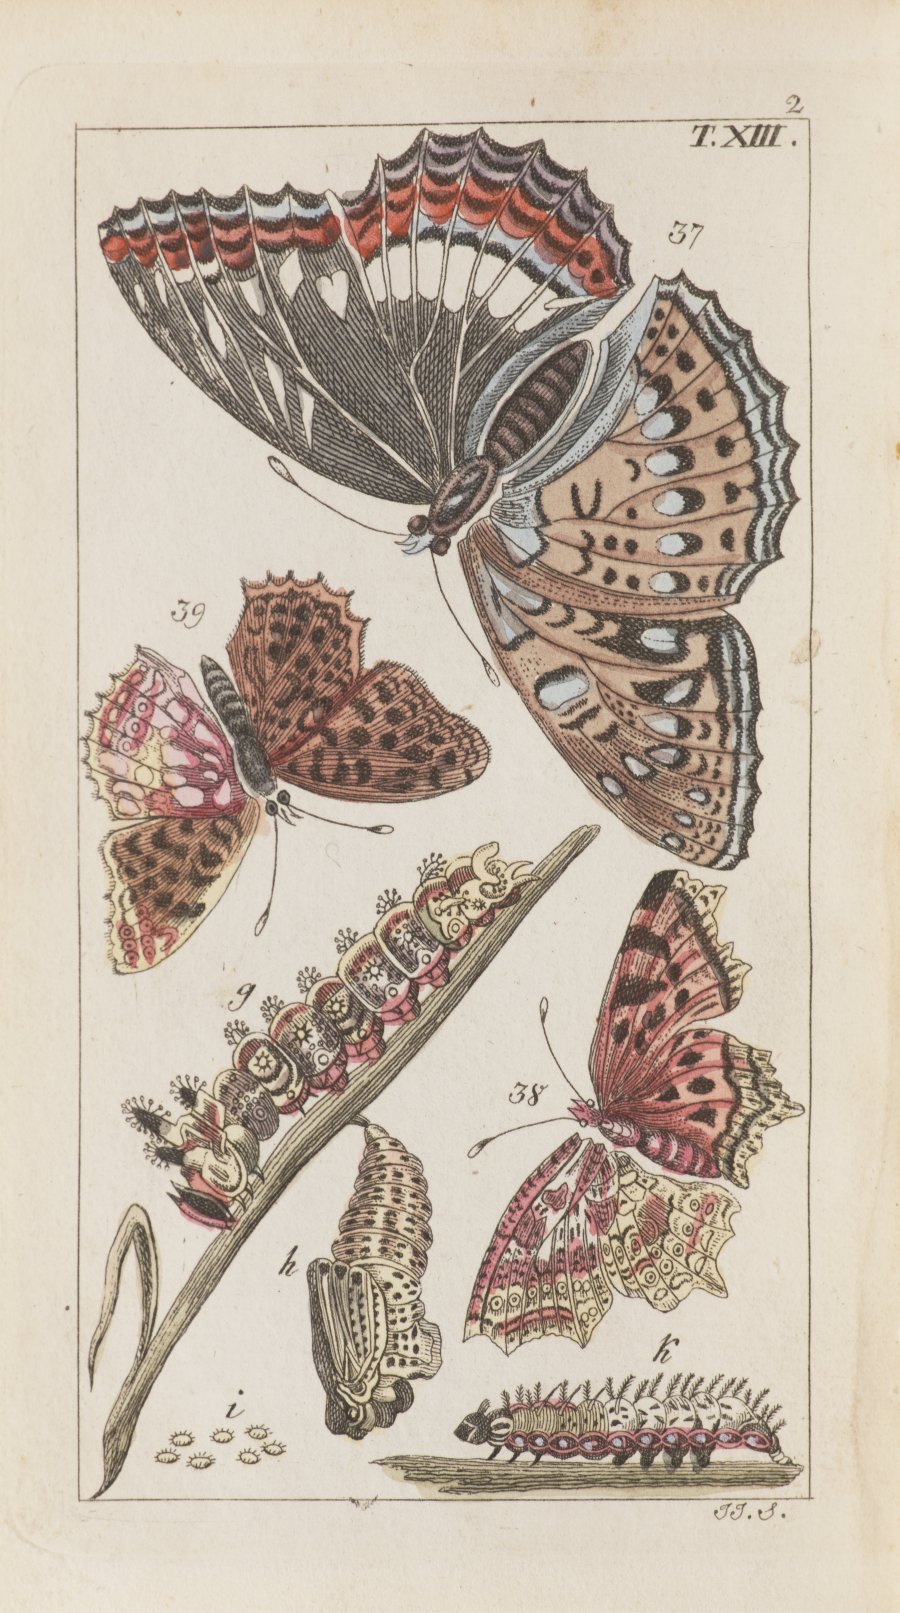 ATLAS OF INSECTS AND BUTTERFLIES